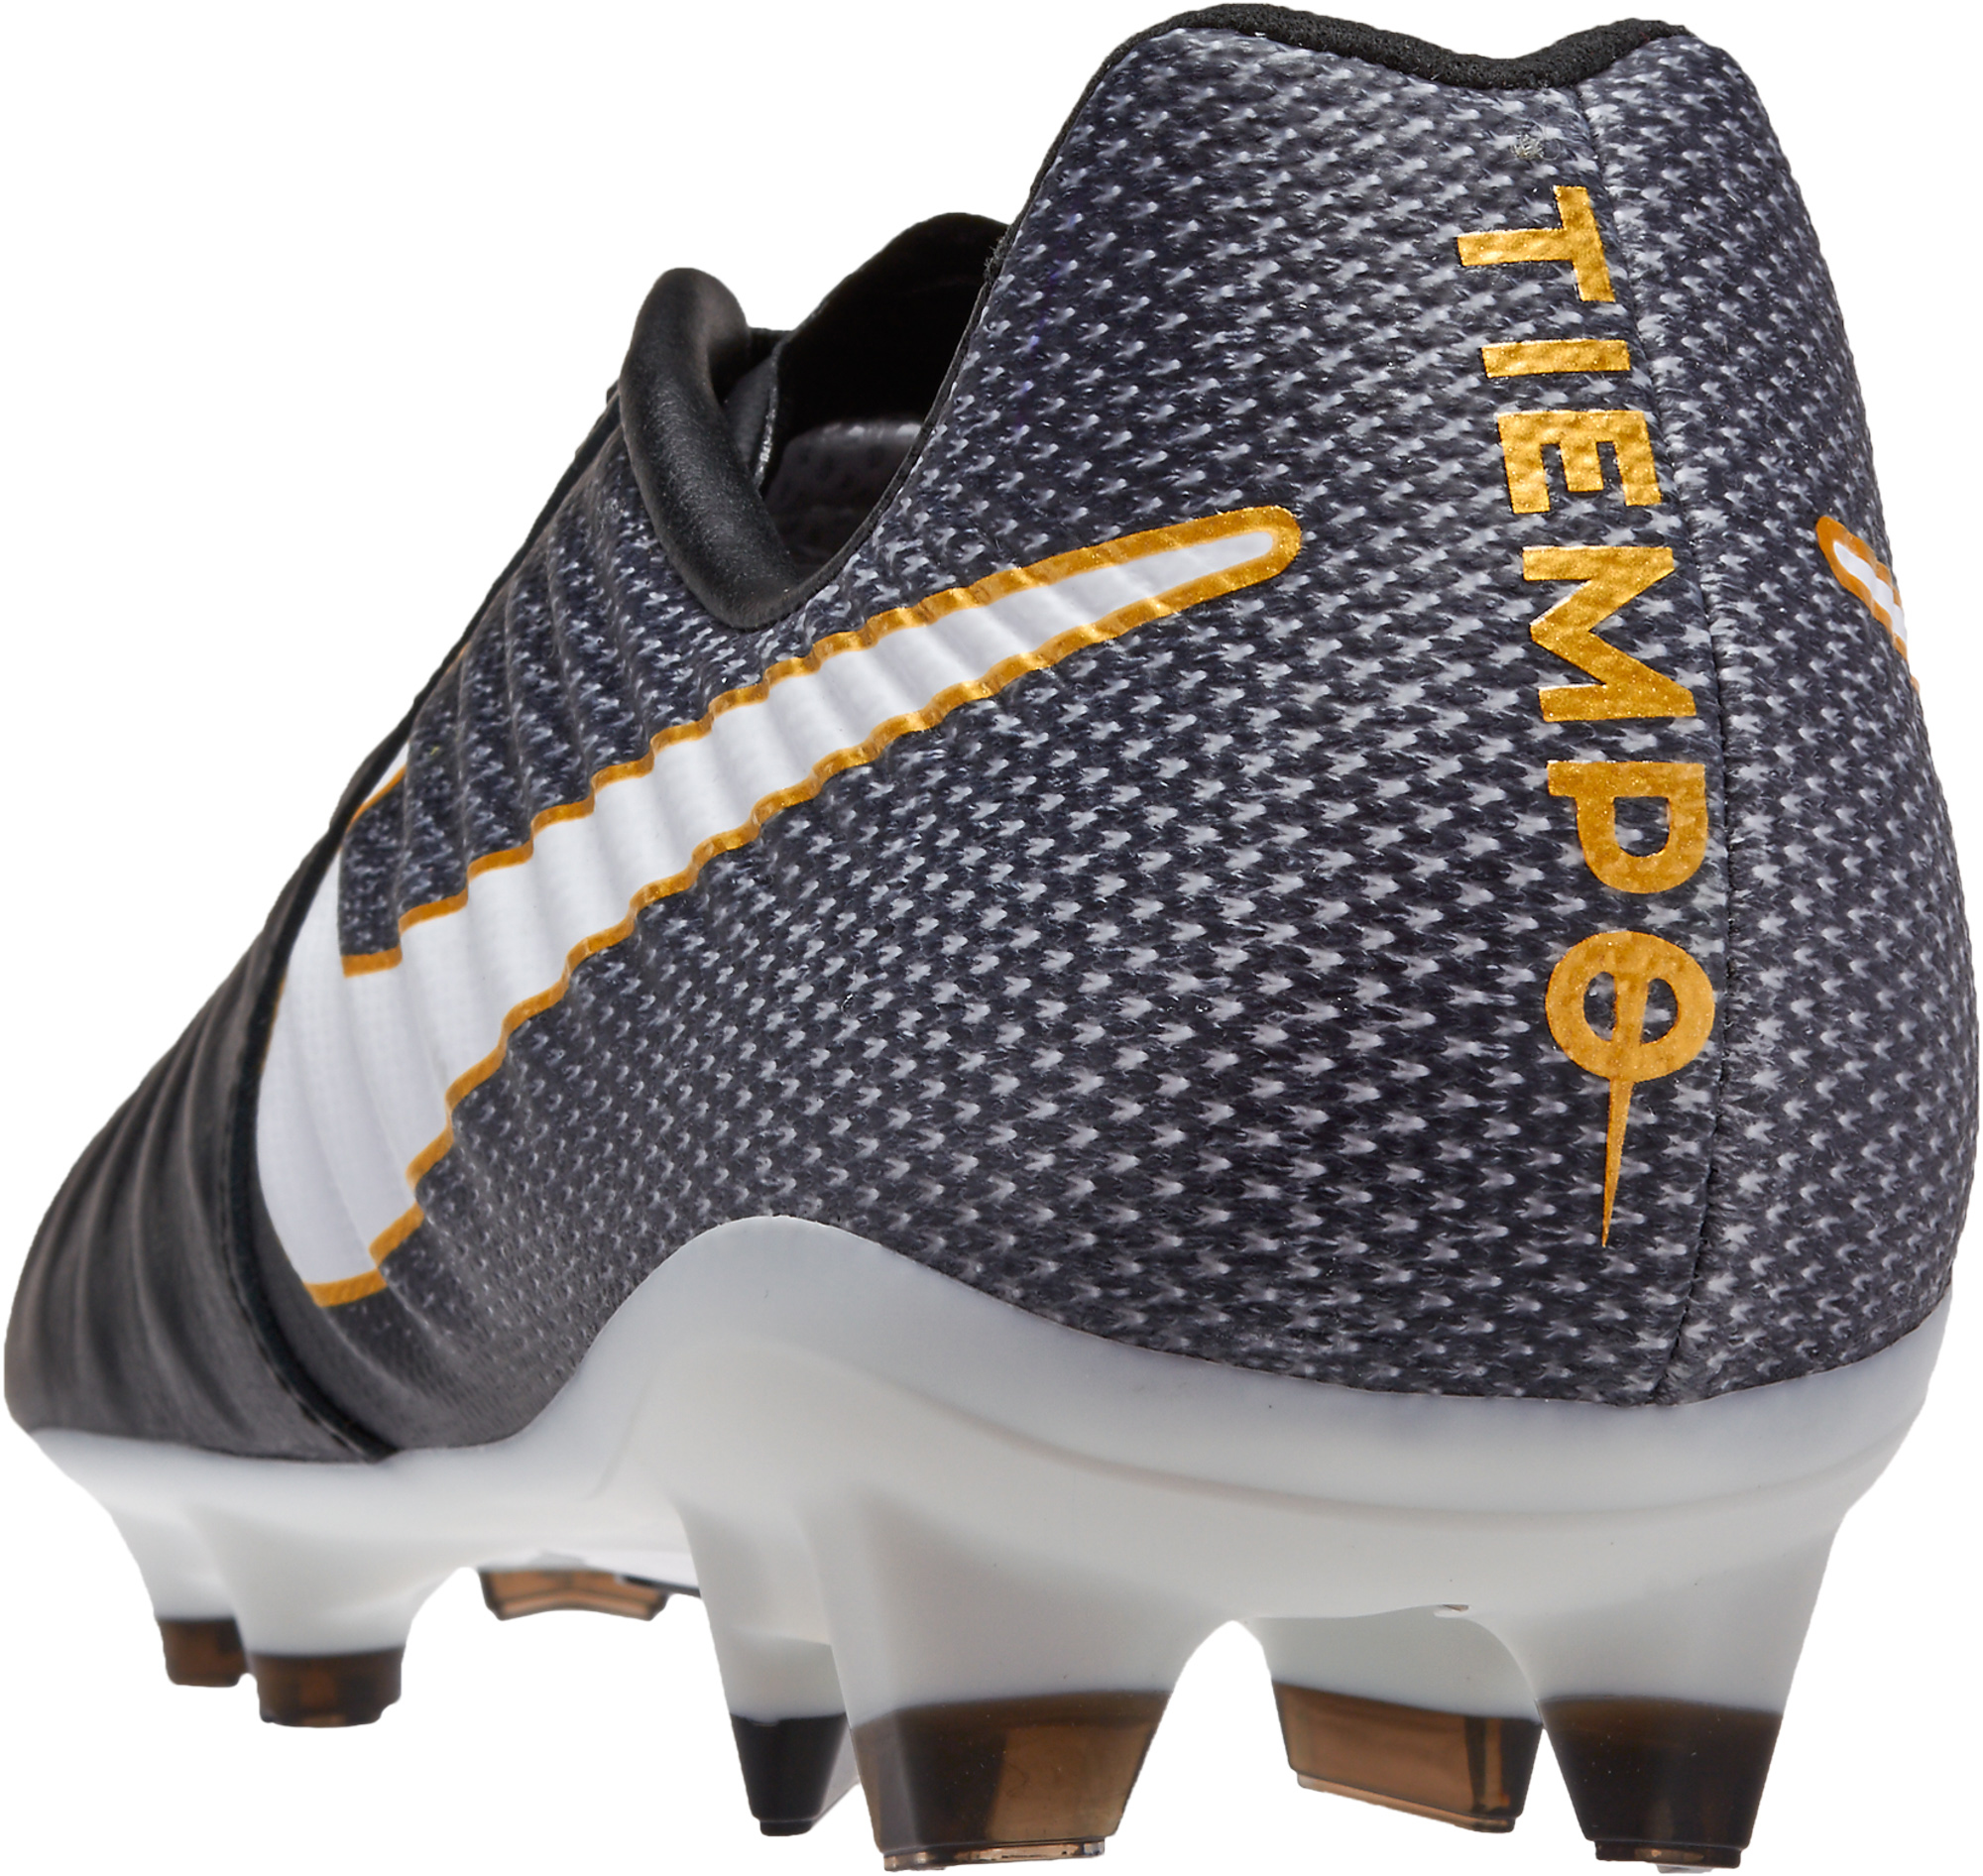 Nike Tiempo Legacy III FG Soccer Cleats - Black & White - Soccer Master